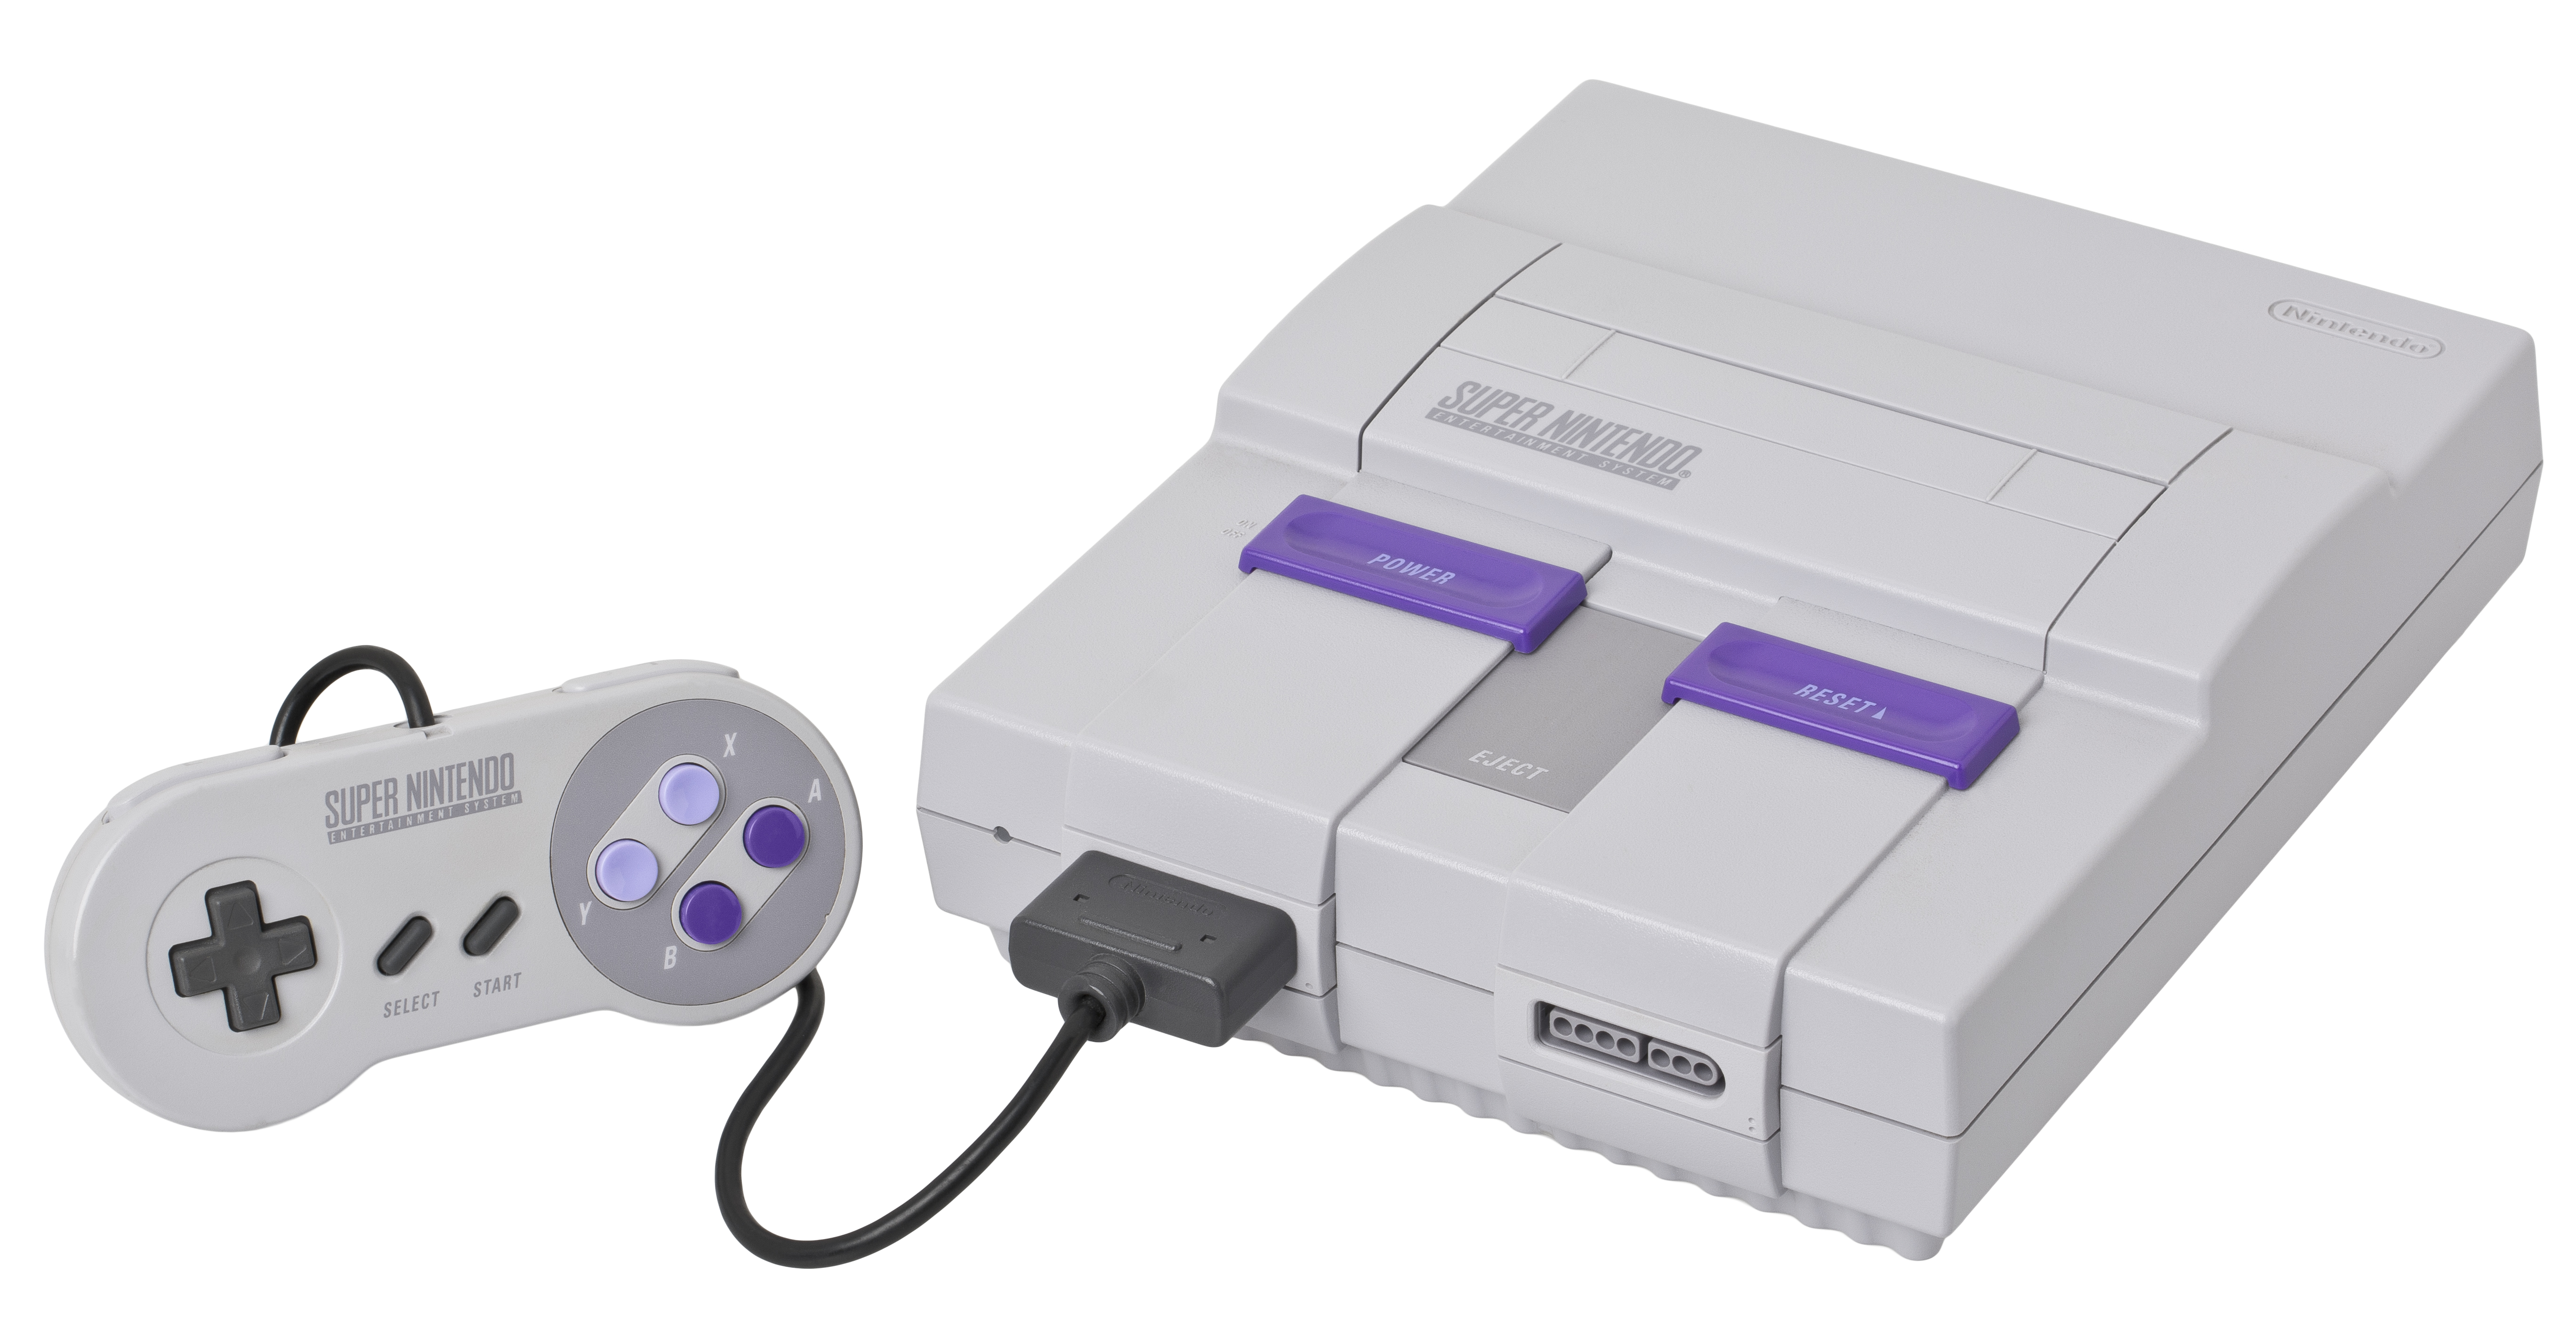 Nintendo Possibly Plans to Release the Mini SNES Console - Eurogamer Sourced Information, but No Official Nintendo Announcement